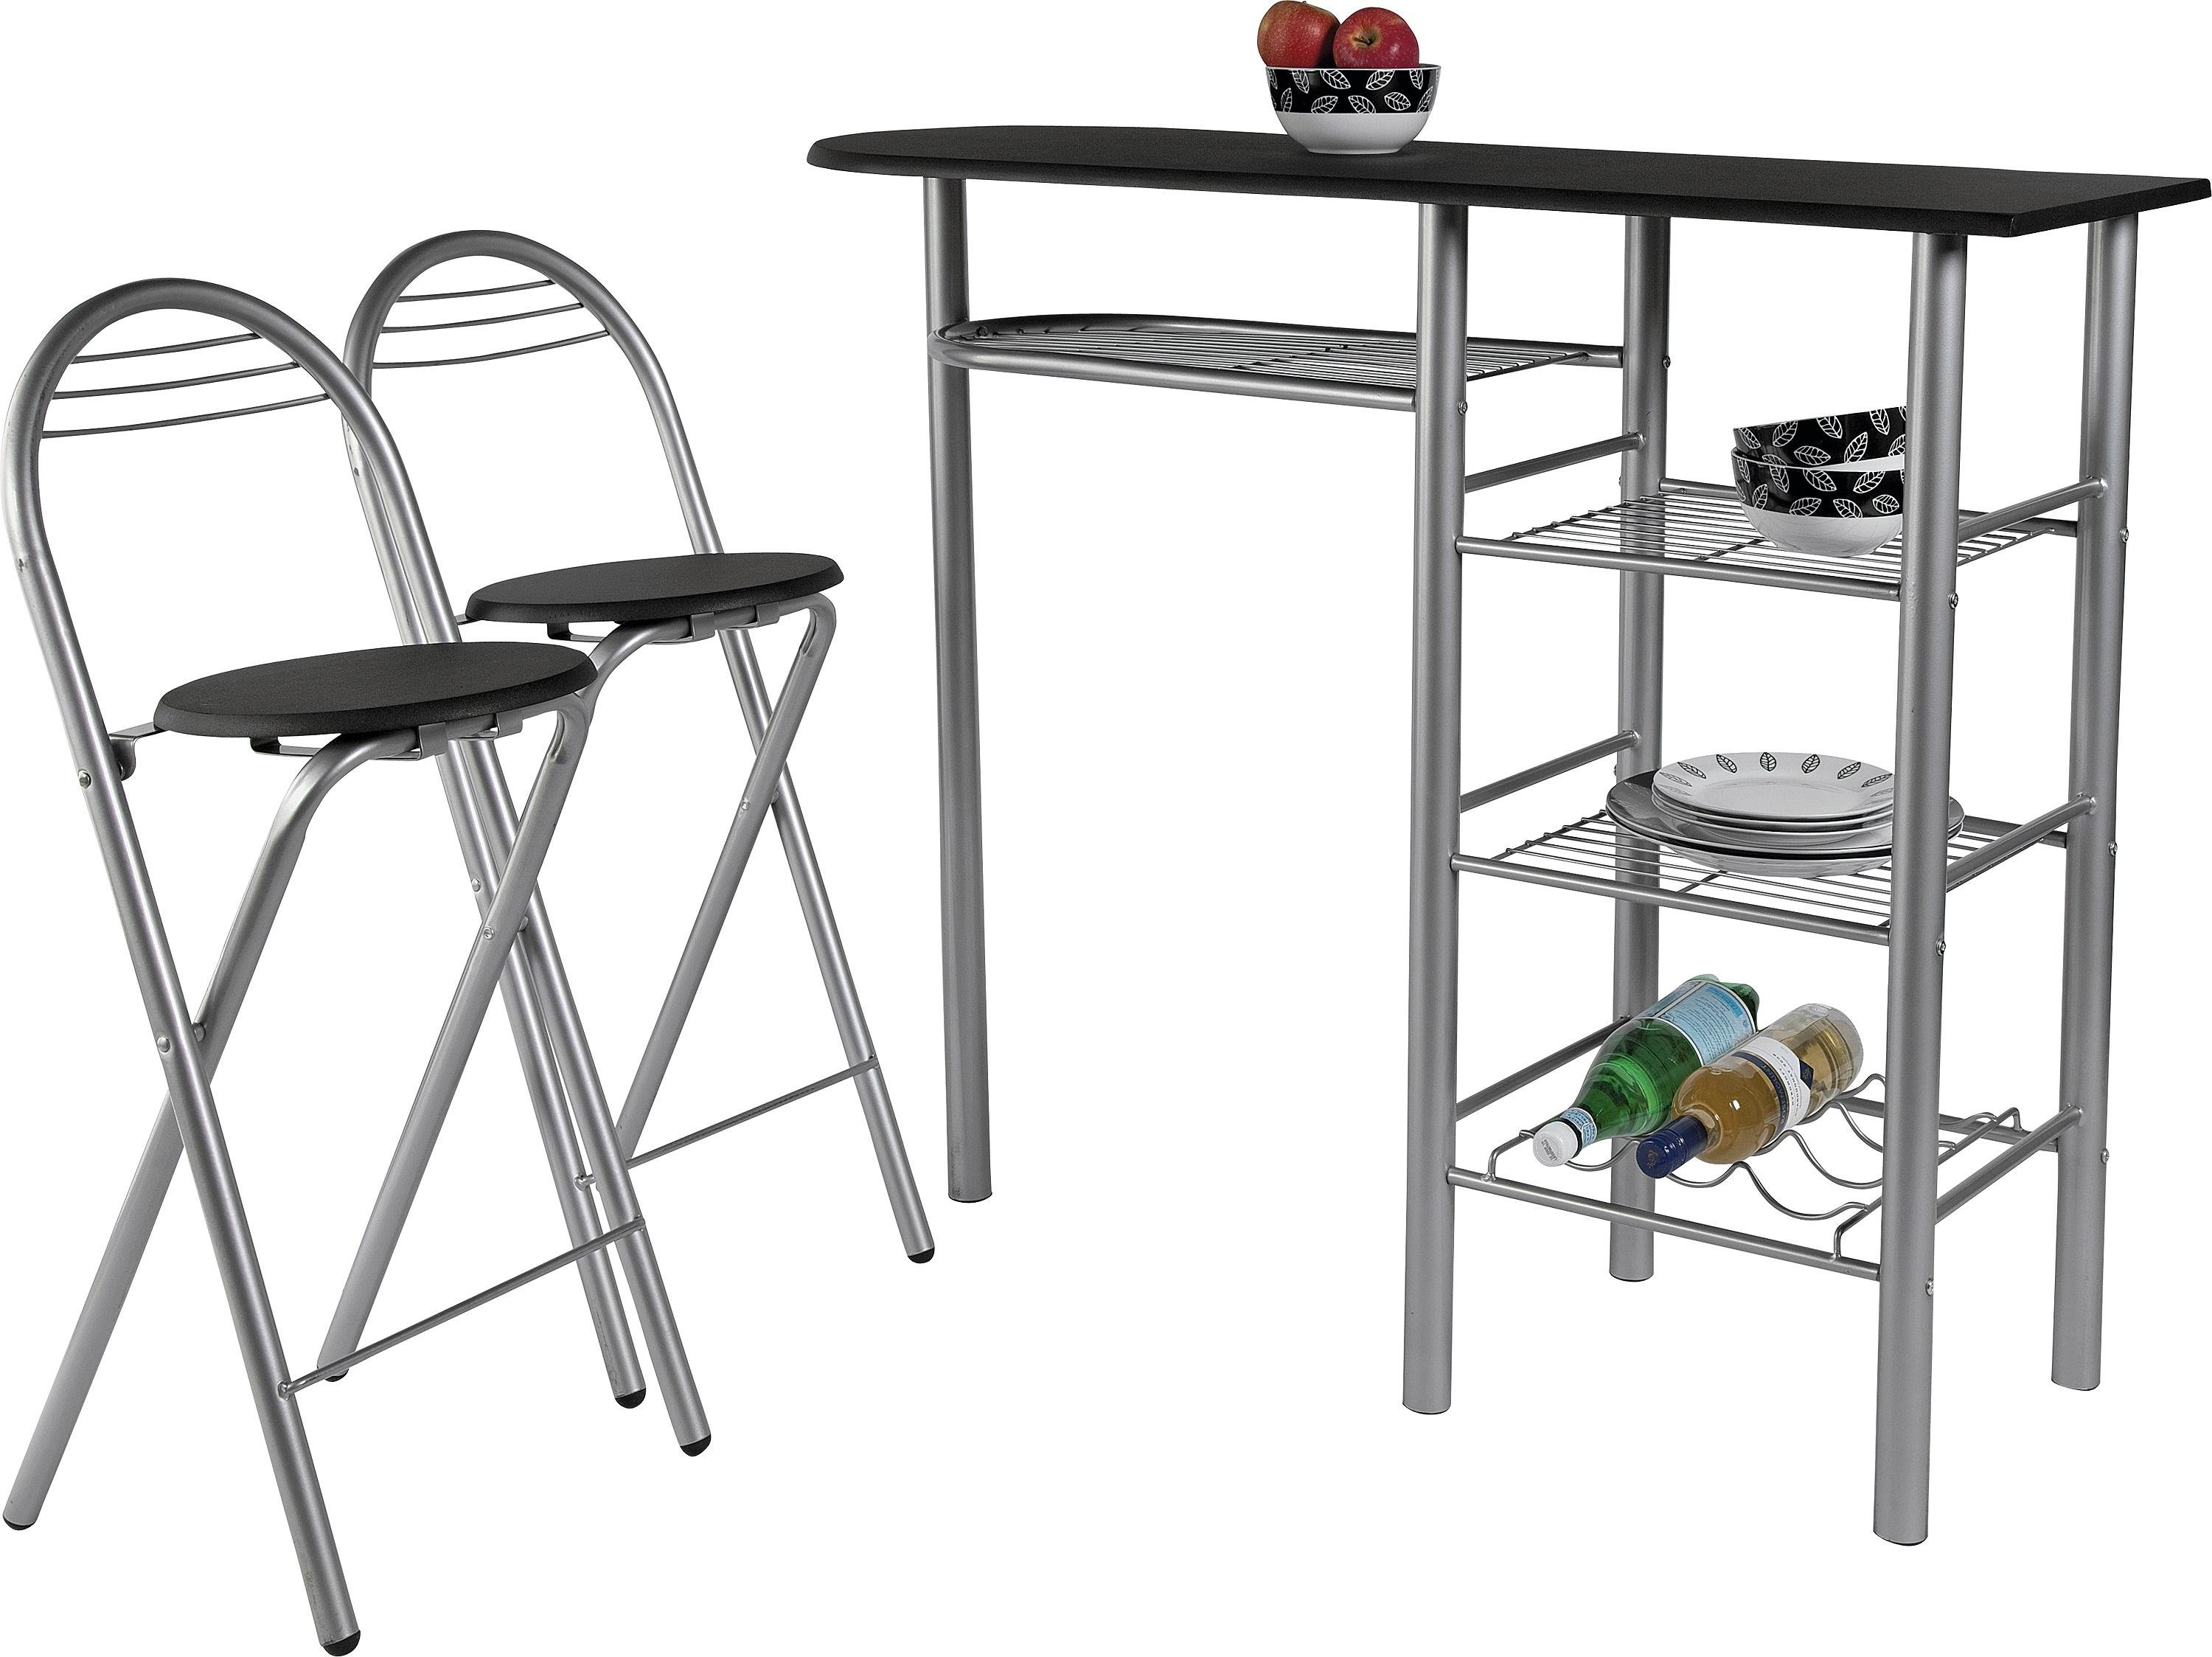 Argos Home Amelia Breakfast Bar & 2 Chairs review